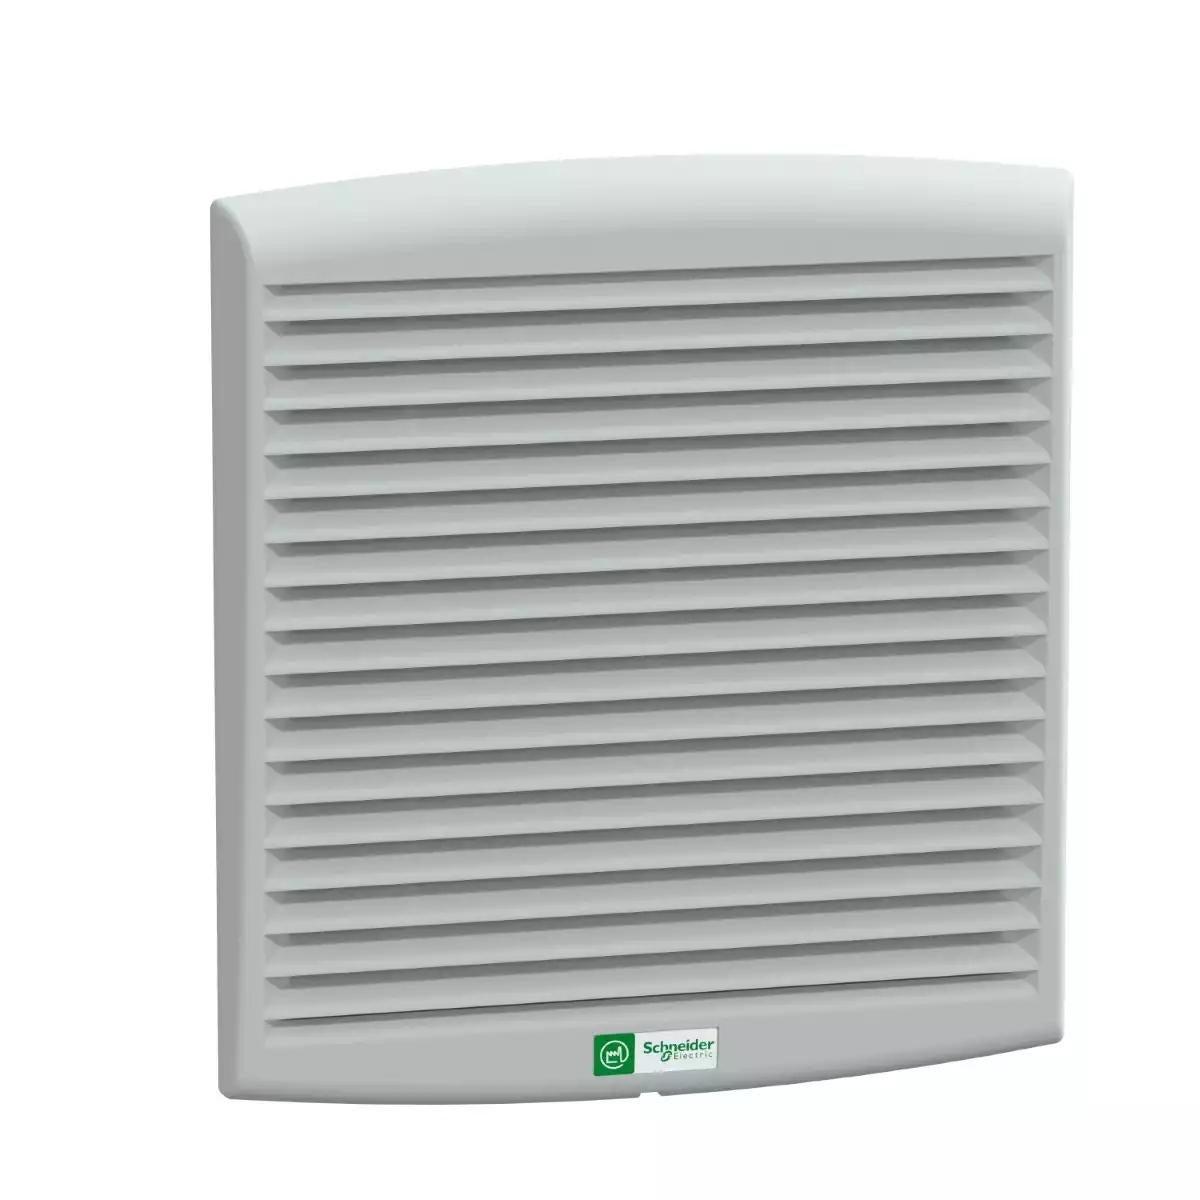 ClimaSys forced vent. IP54, 300m3/h, 230V, with outlet grille and filter G2